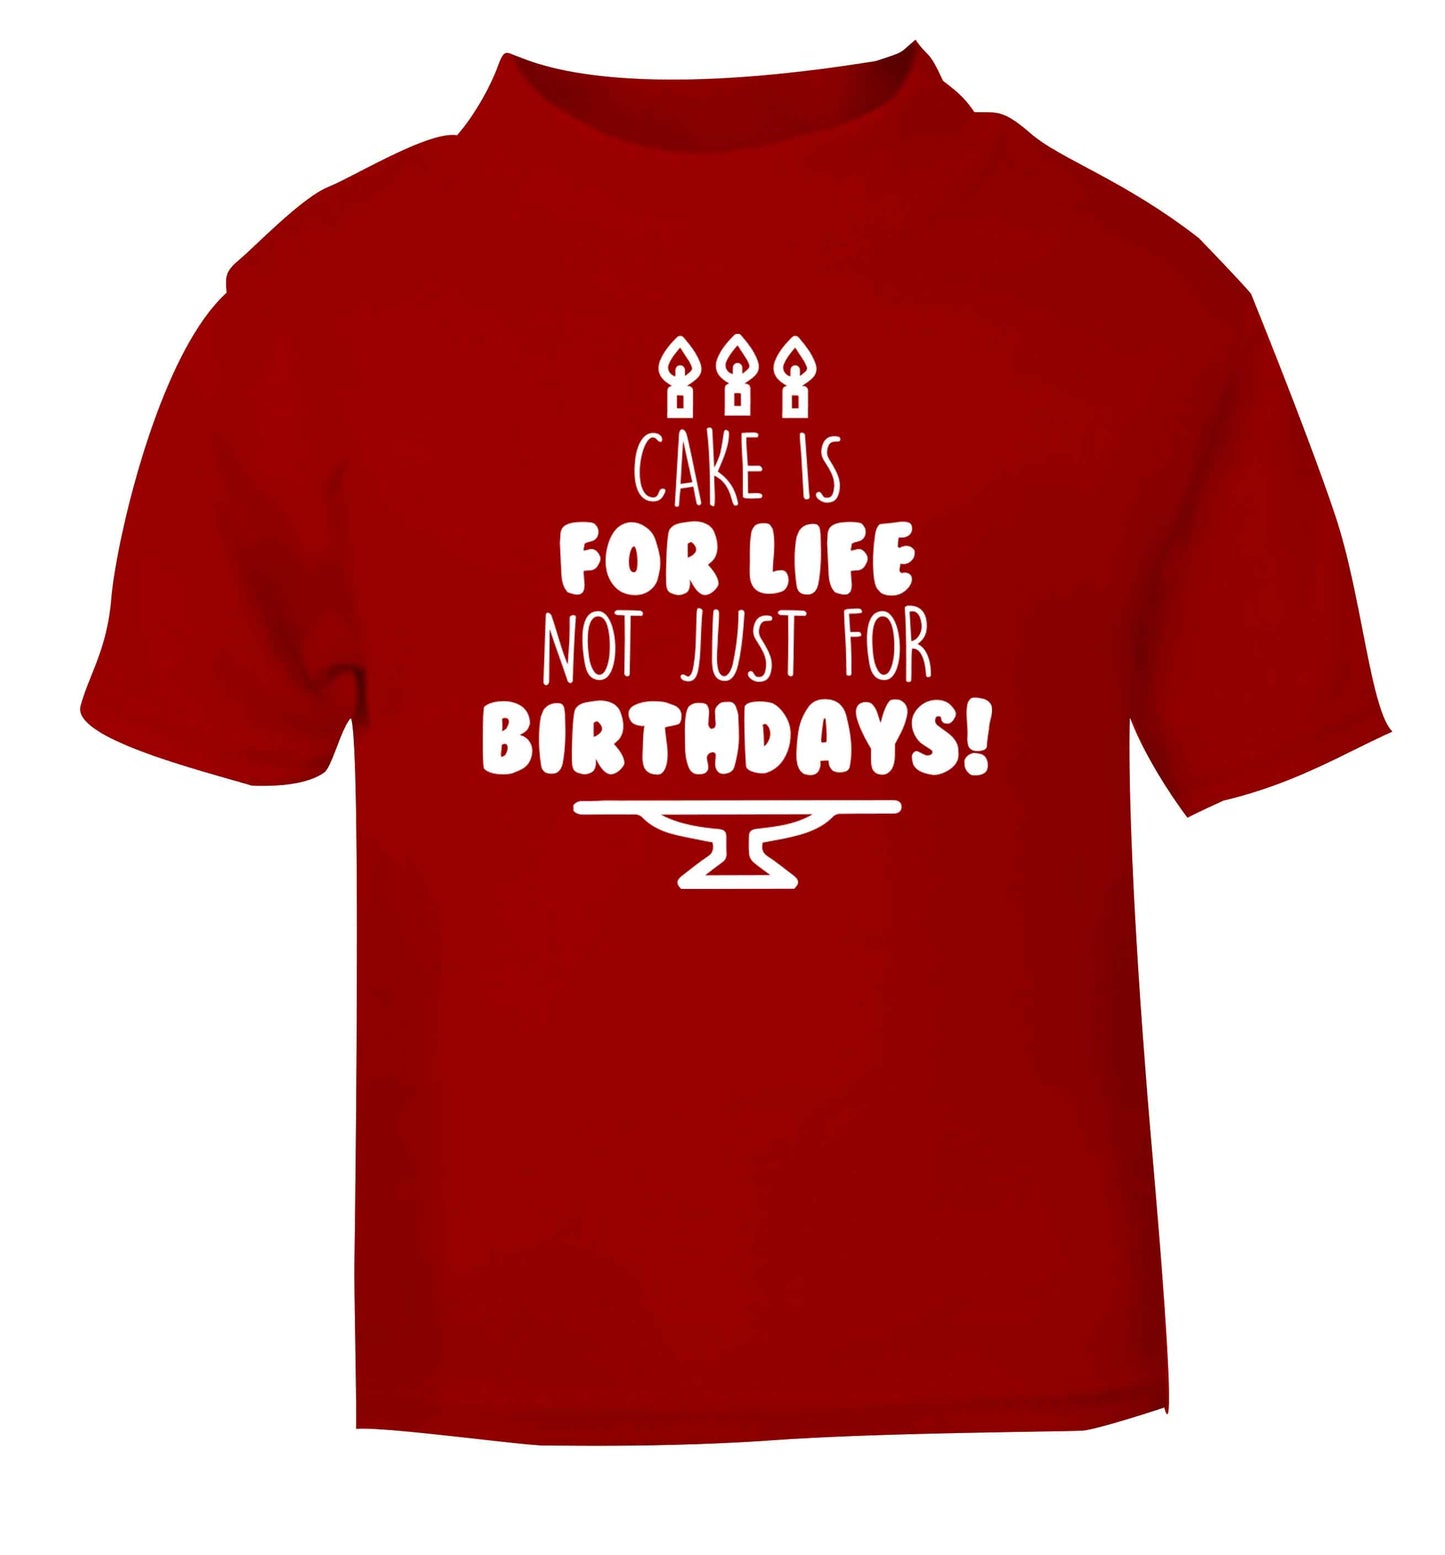 Cake is for life not just for birthdays red Baby Toddler Tshirt 2 Years